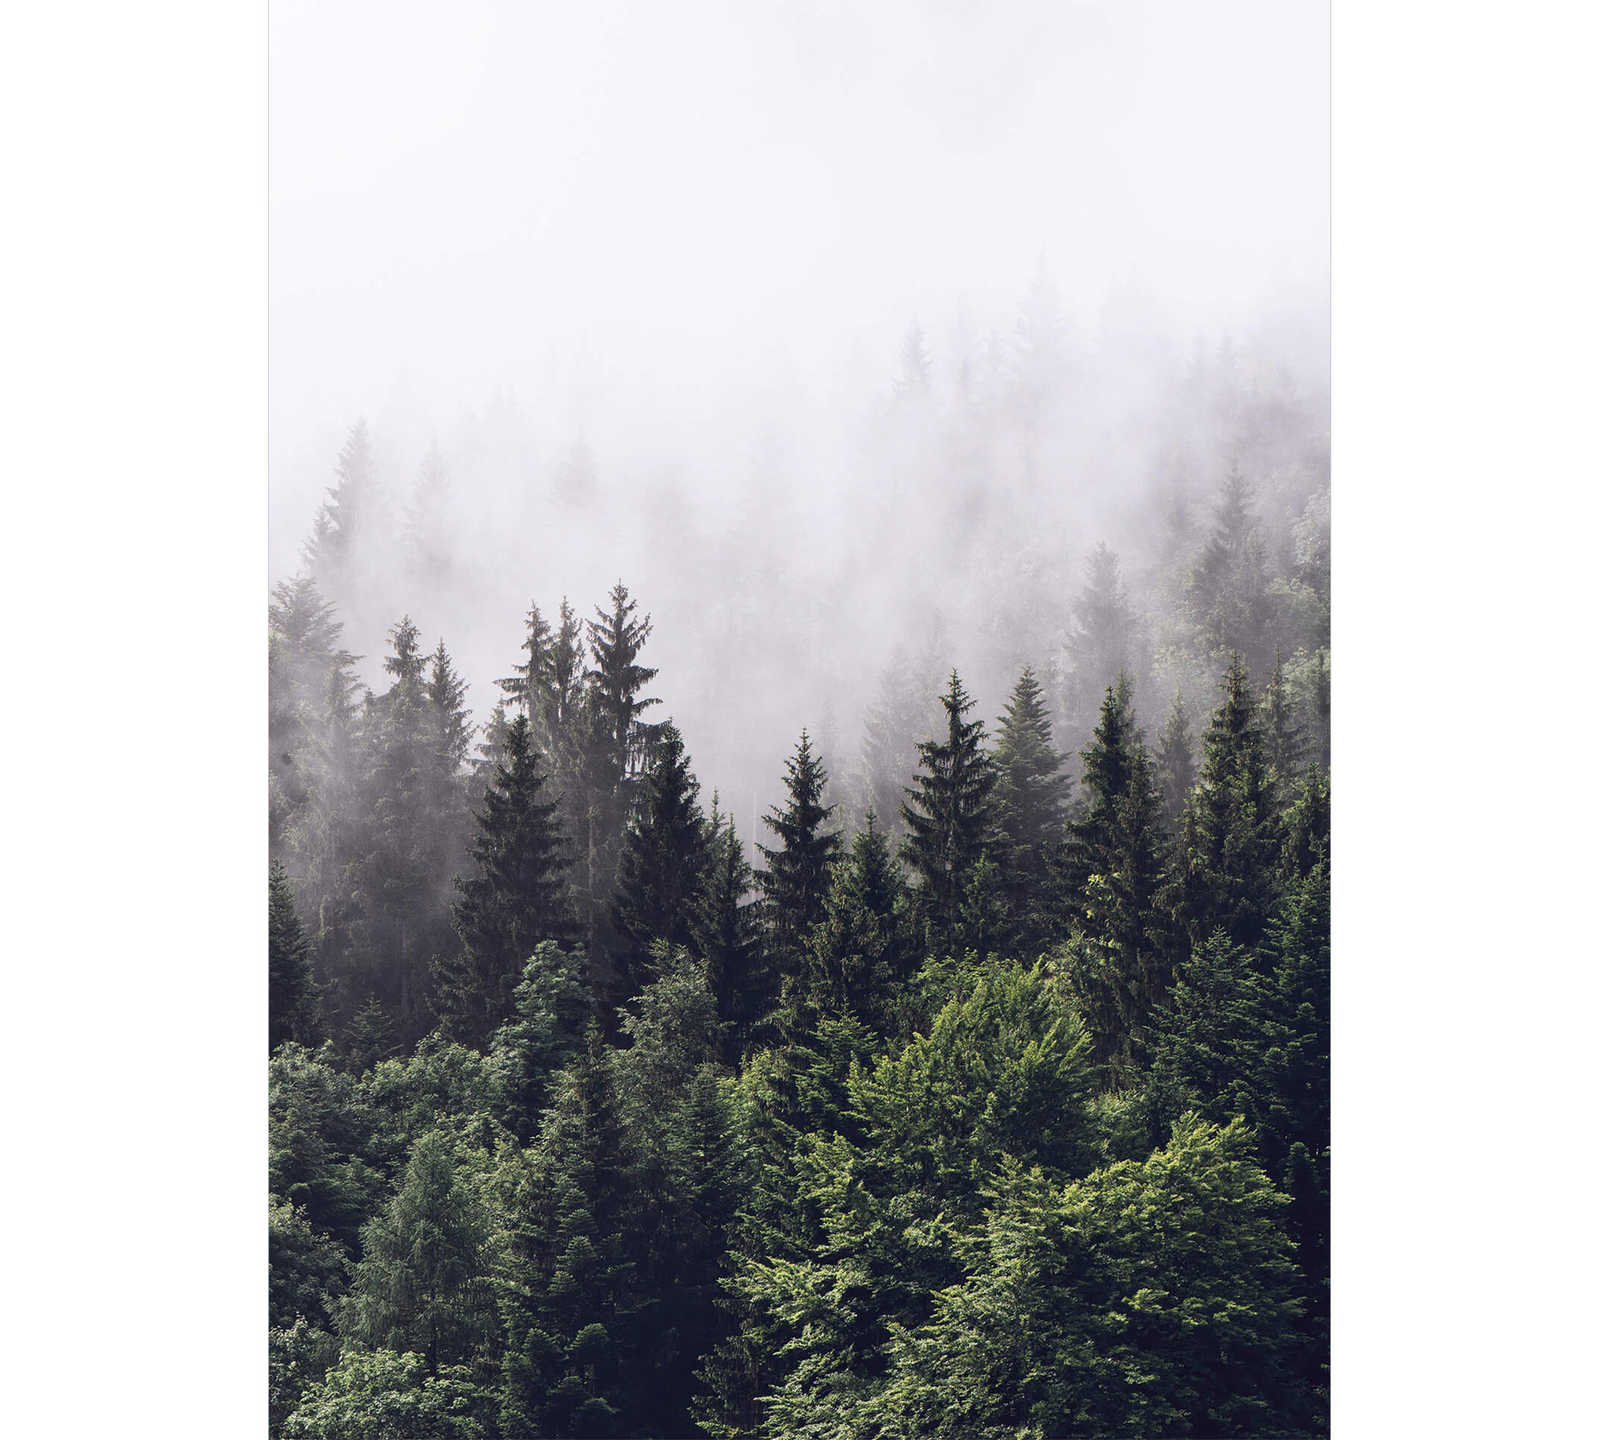         Photo wallpaper cloud forest in portrait format - green, white
    